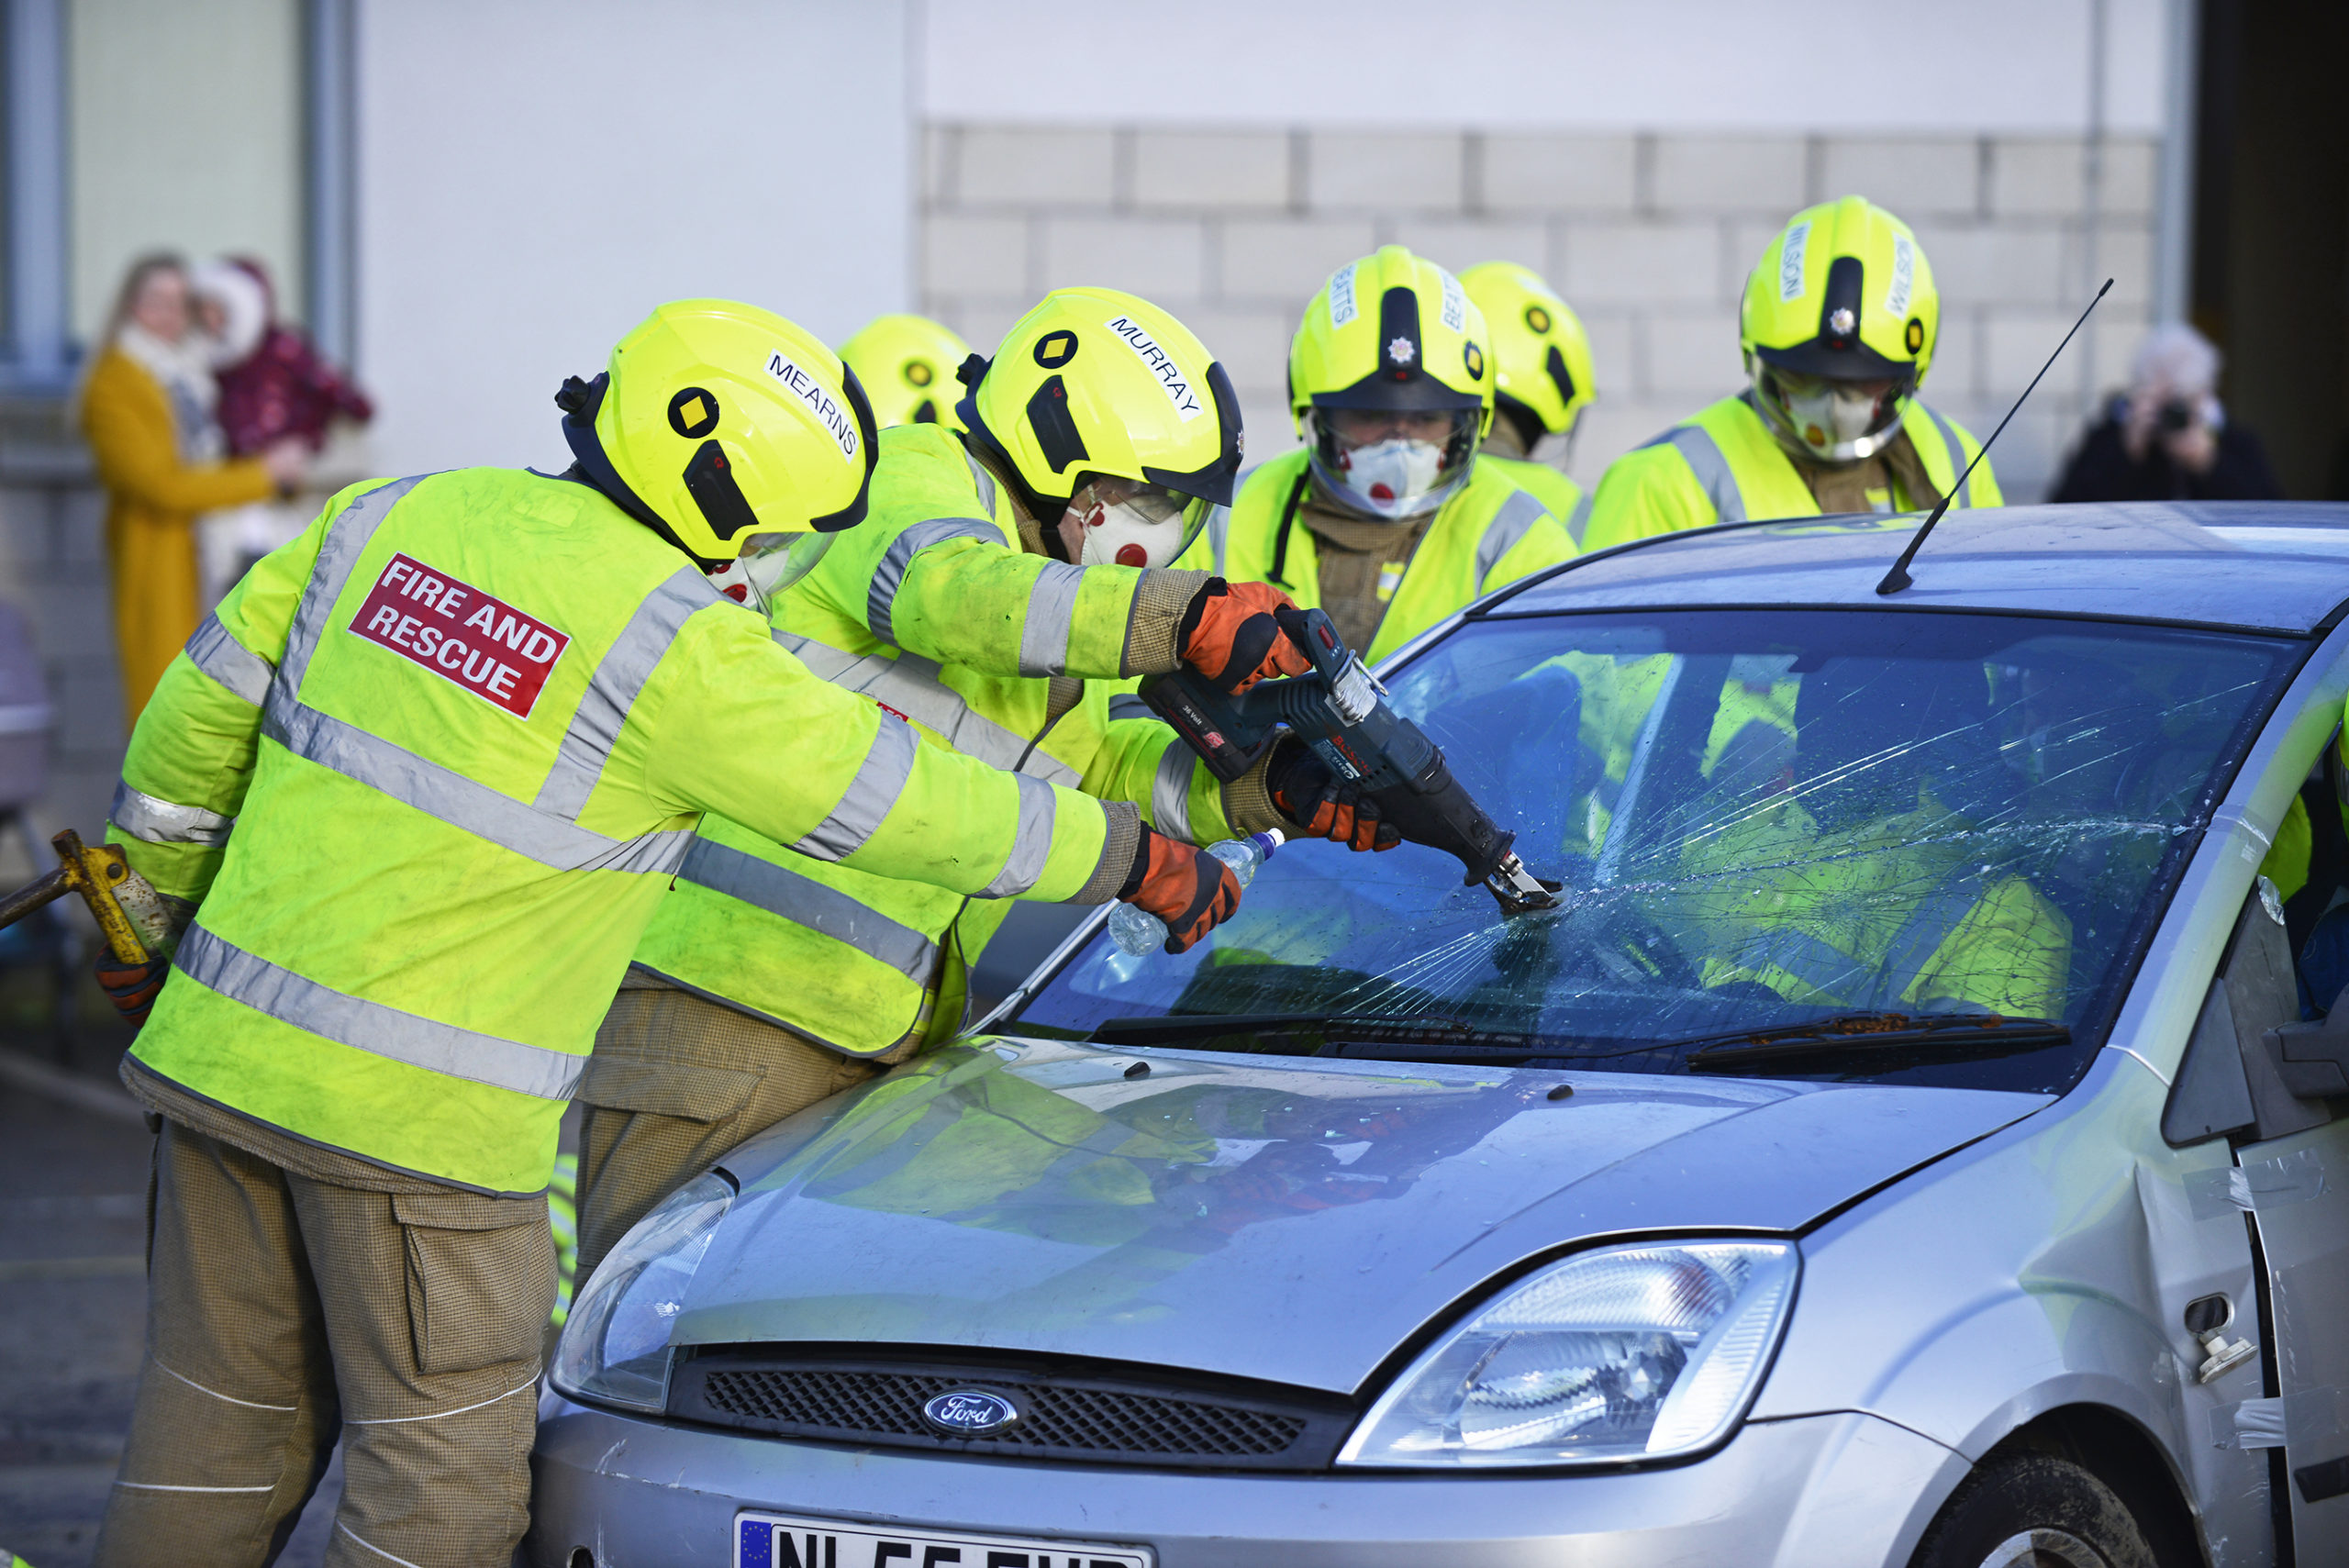 Firefighters undertake a range of tasks in their roles.